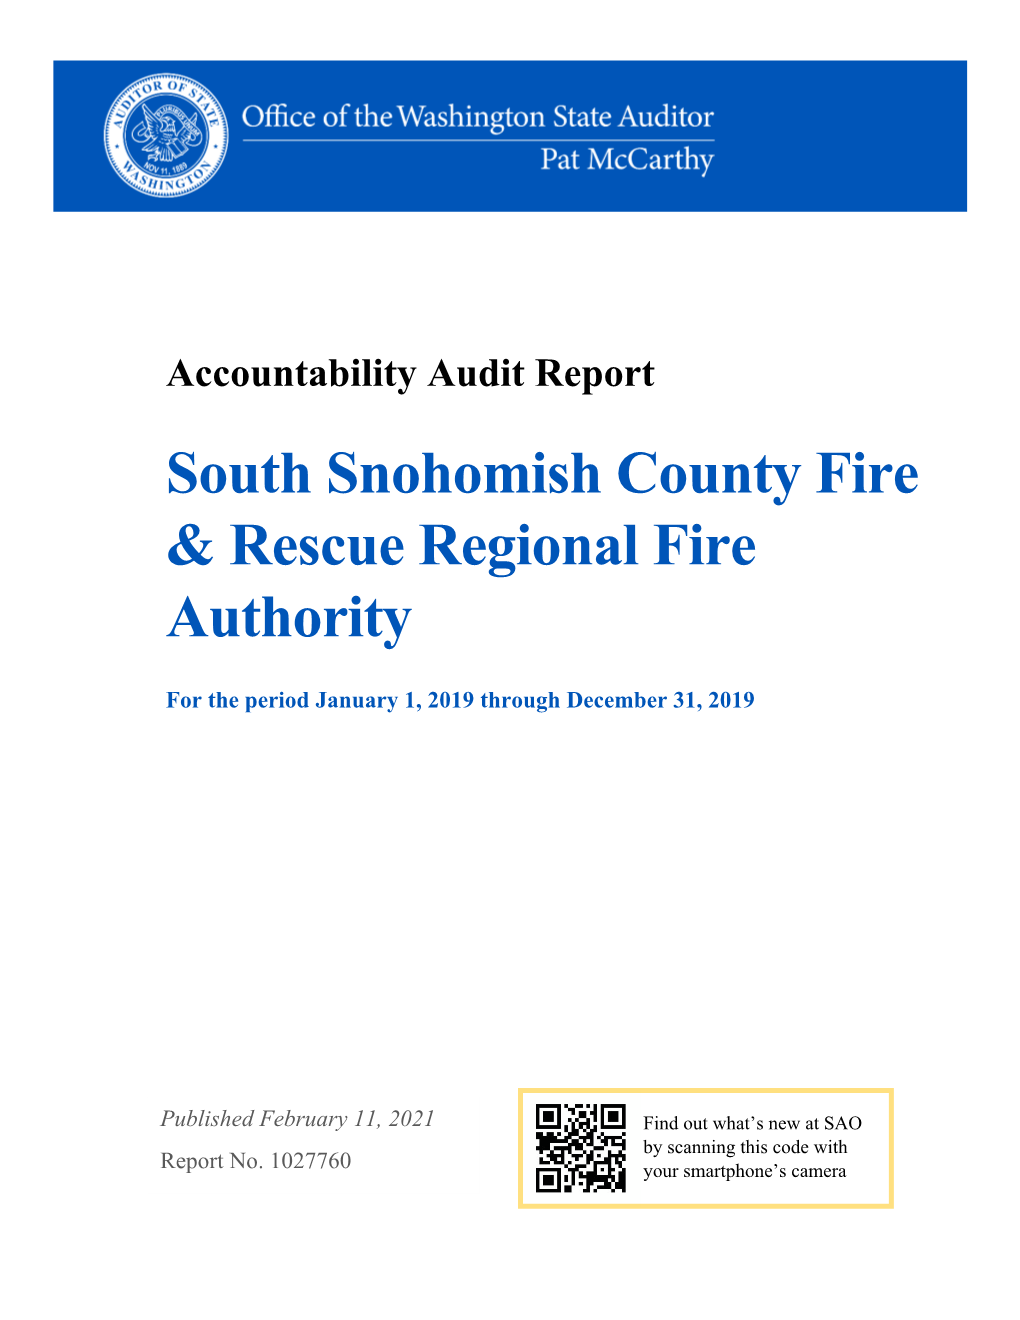 South Snohomish County Fire & Rescue Regional Fire Authority